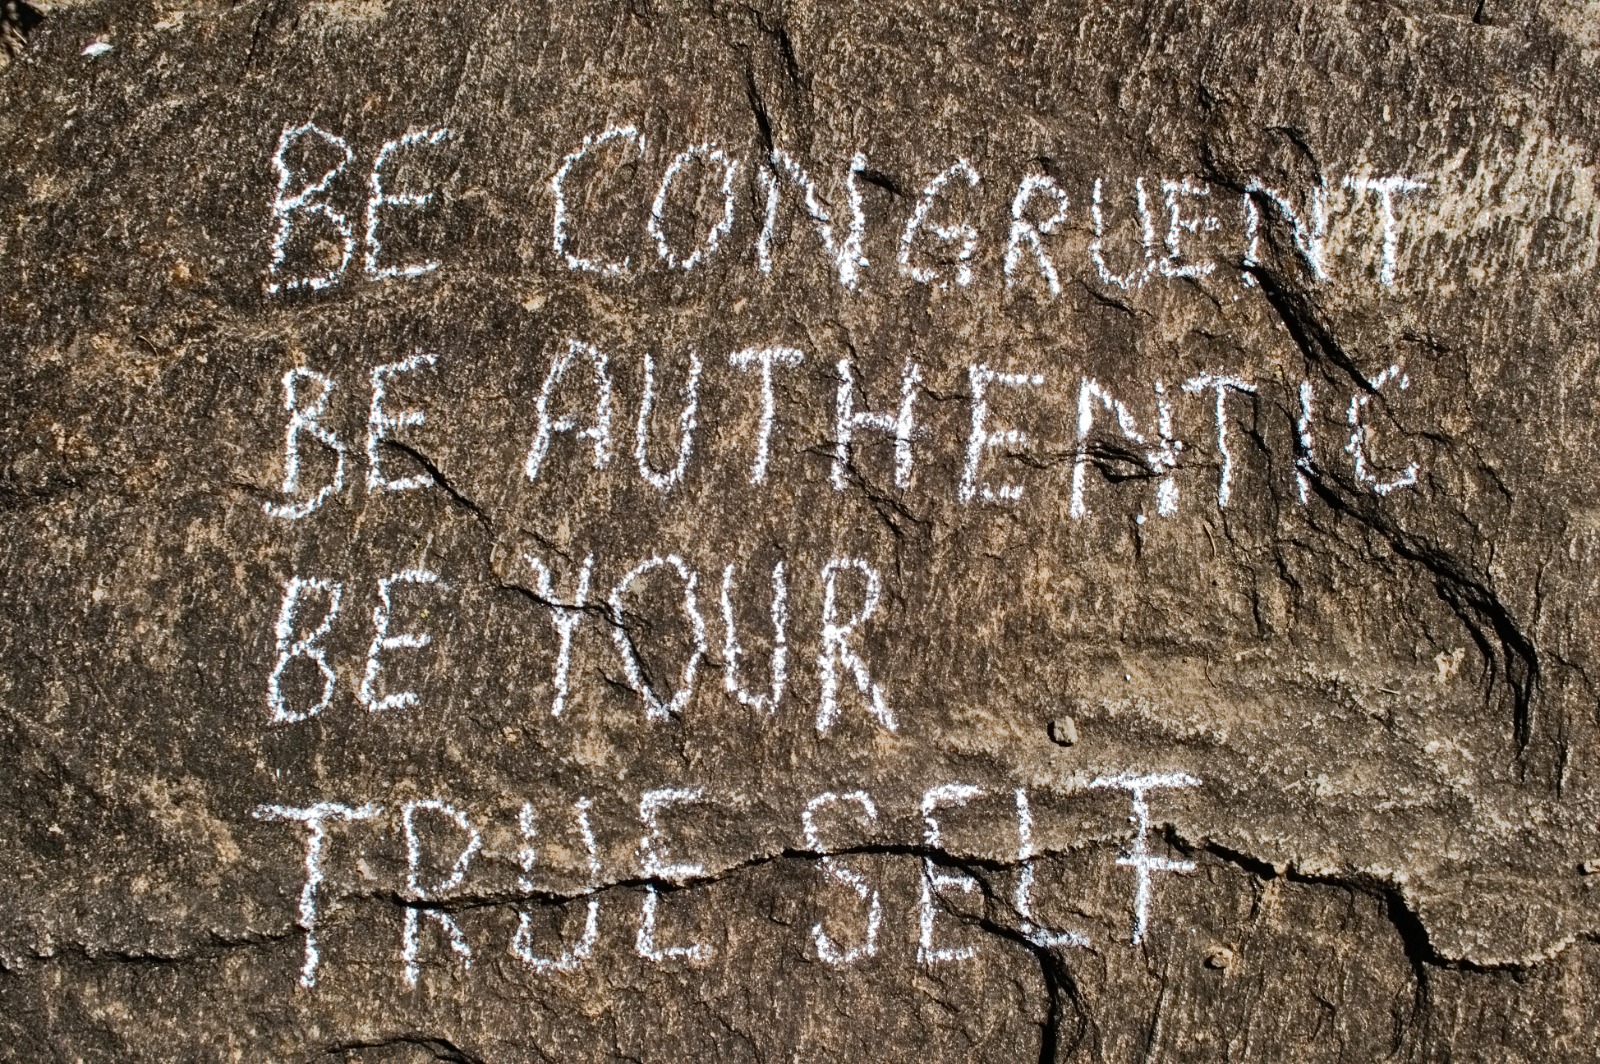 Be Authenticity – Date and Be Yourself